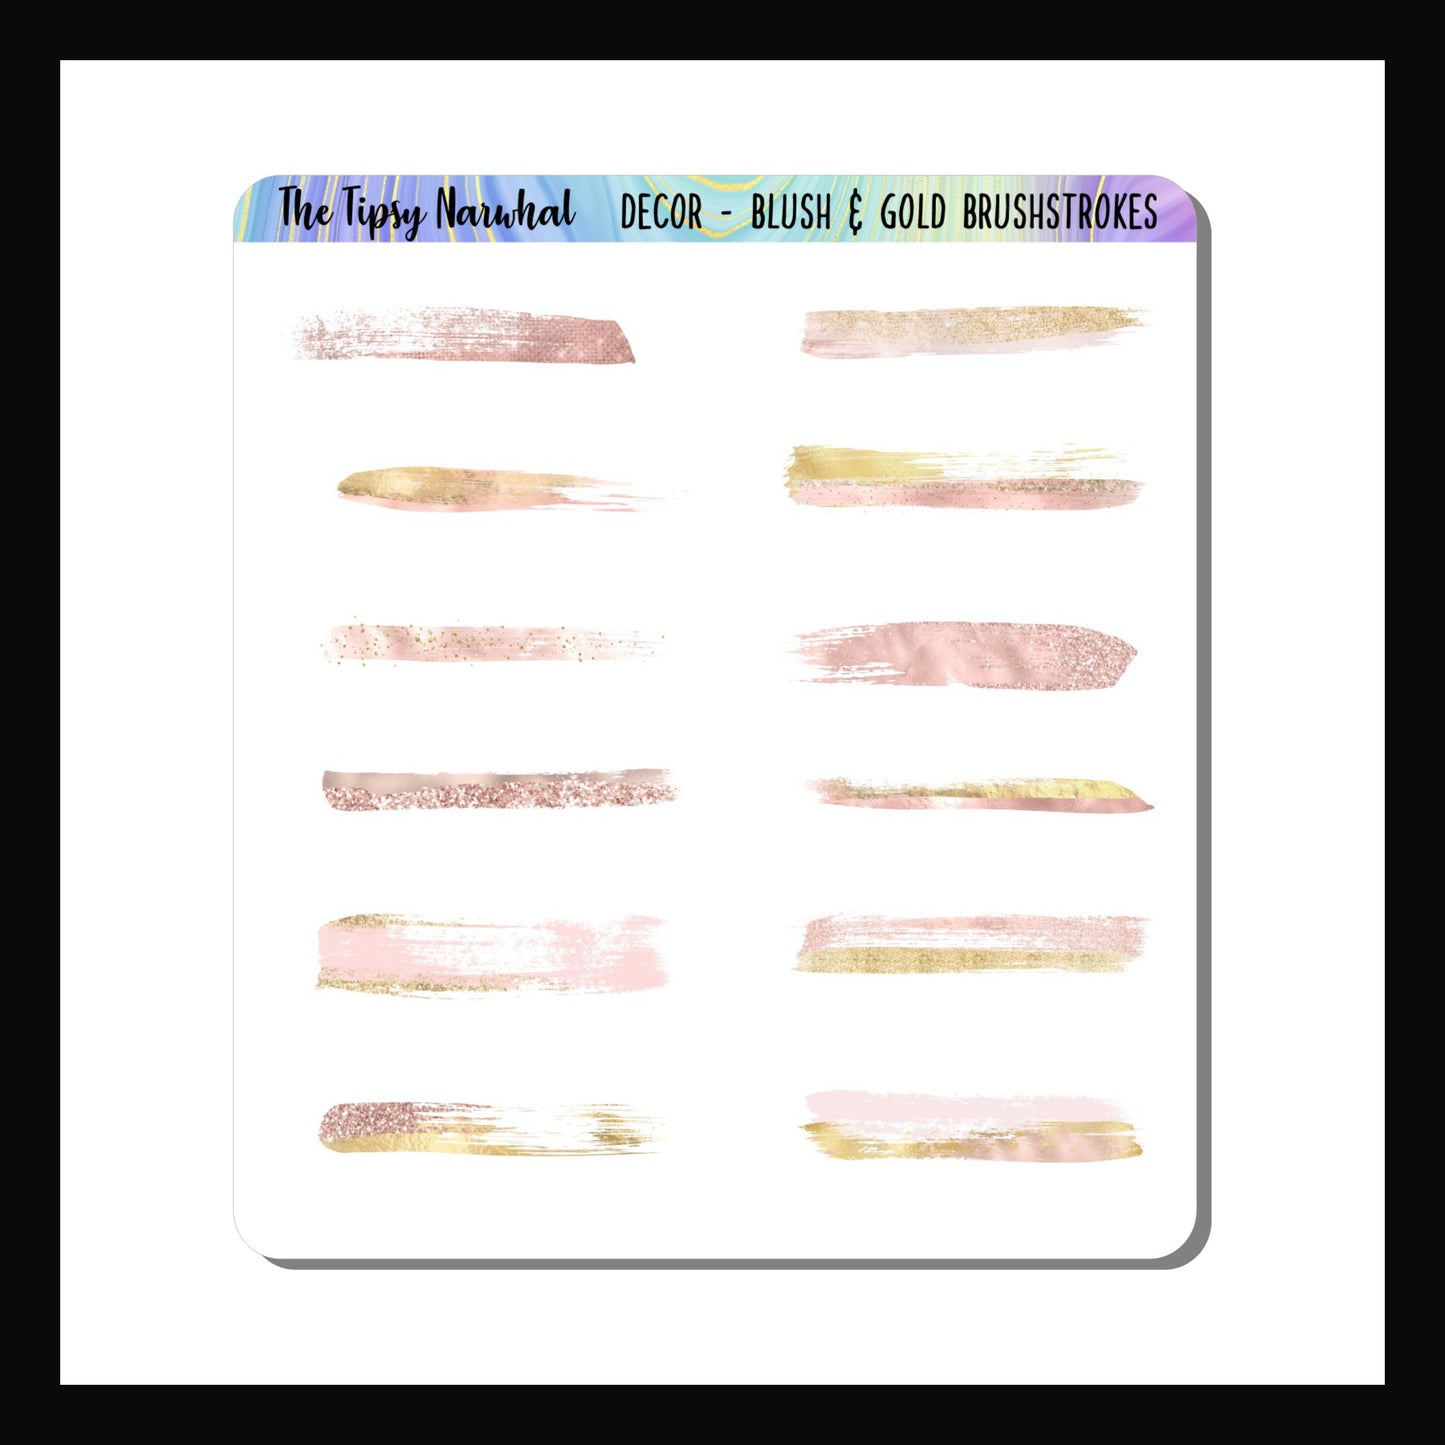 Blush and Gold Brushstroke stickers, brushstrokes in pink and gold glitter, metallic brushstrokes, washi stickers, washi strips, decorative stickers, planner and journal decor